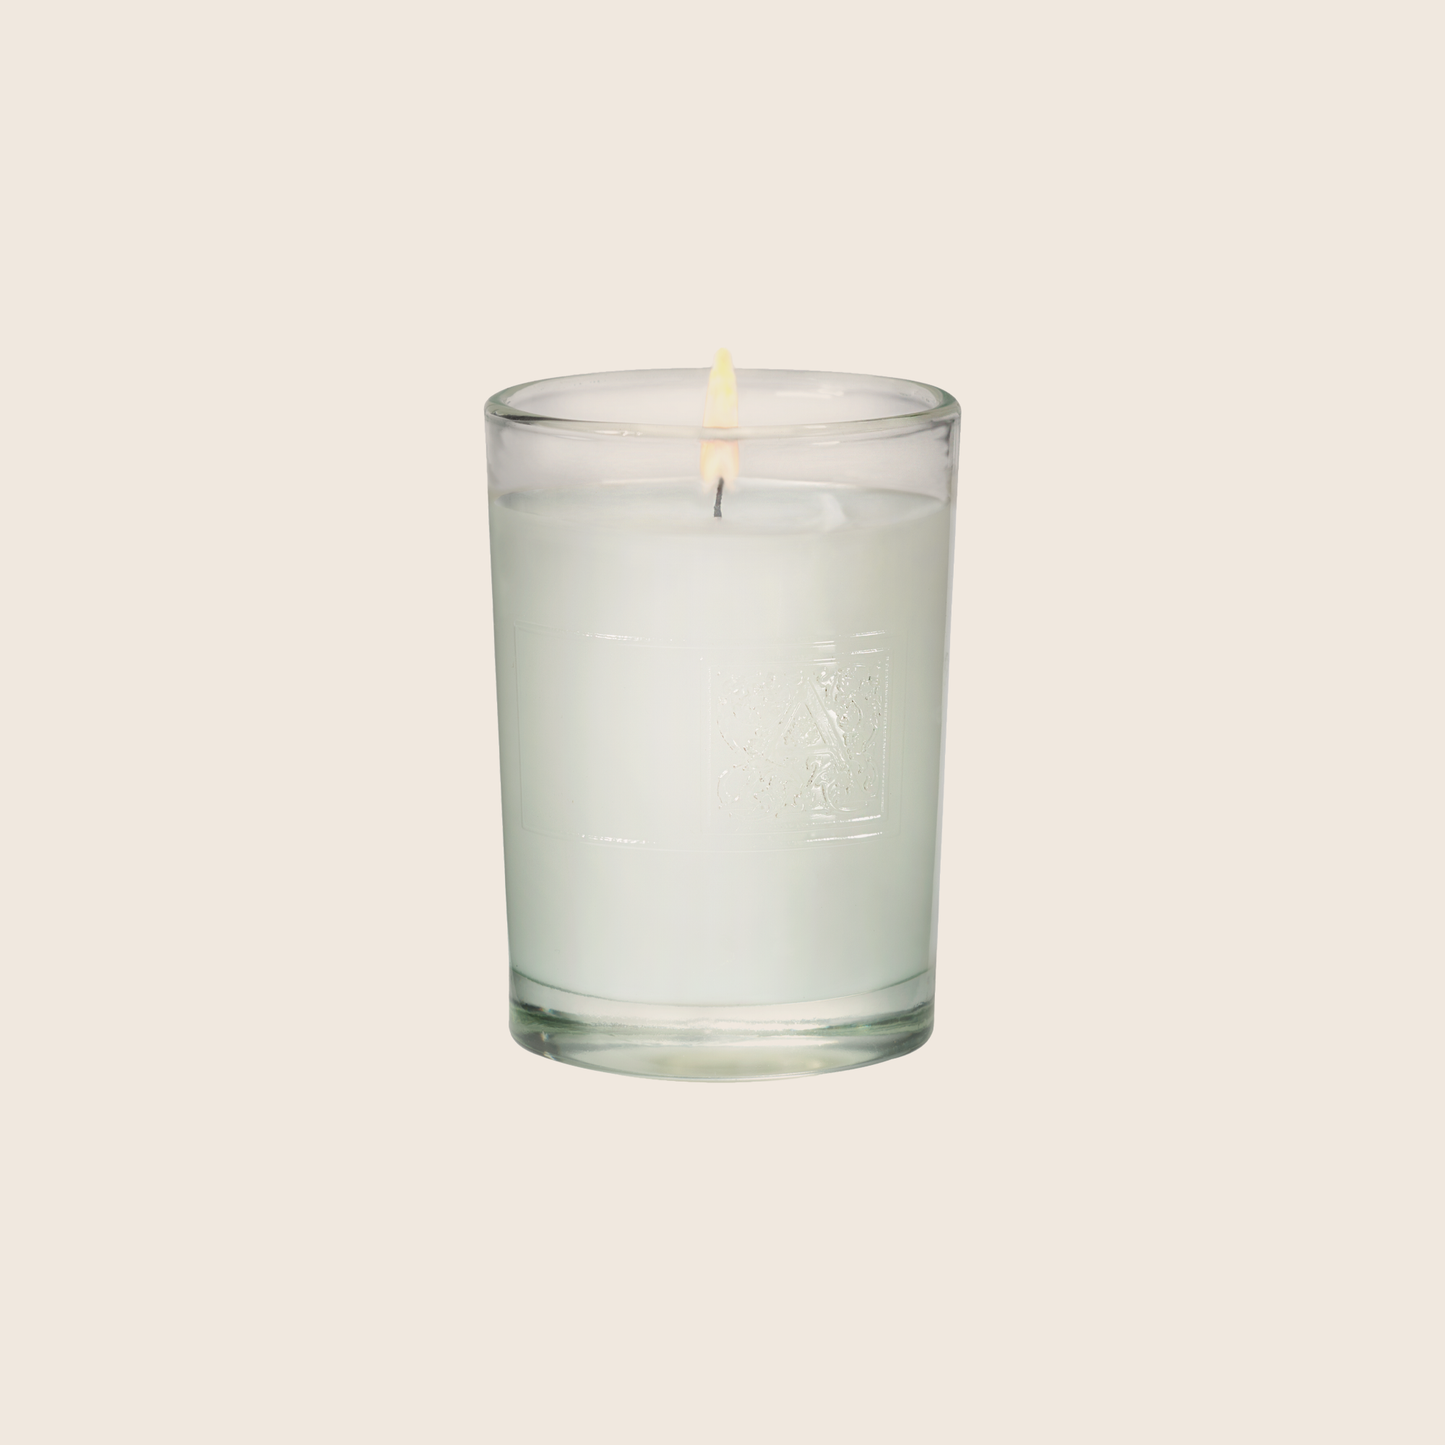 The Smell of Gardenia - Votive Glass Candle